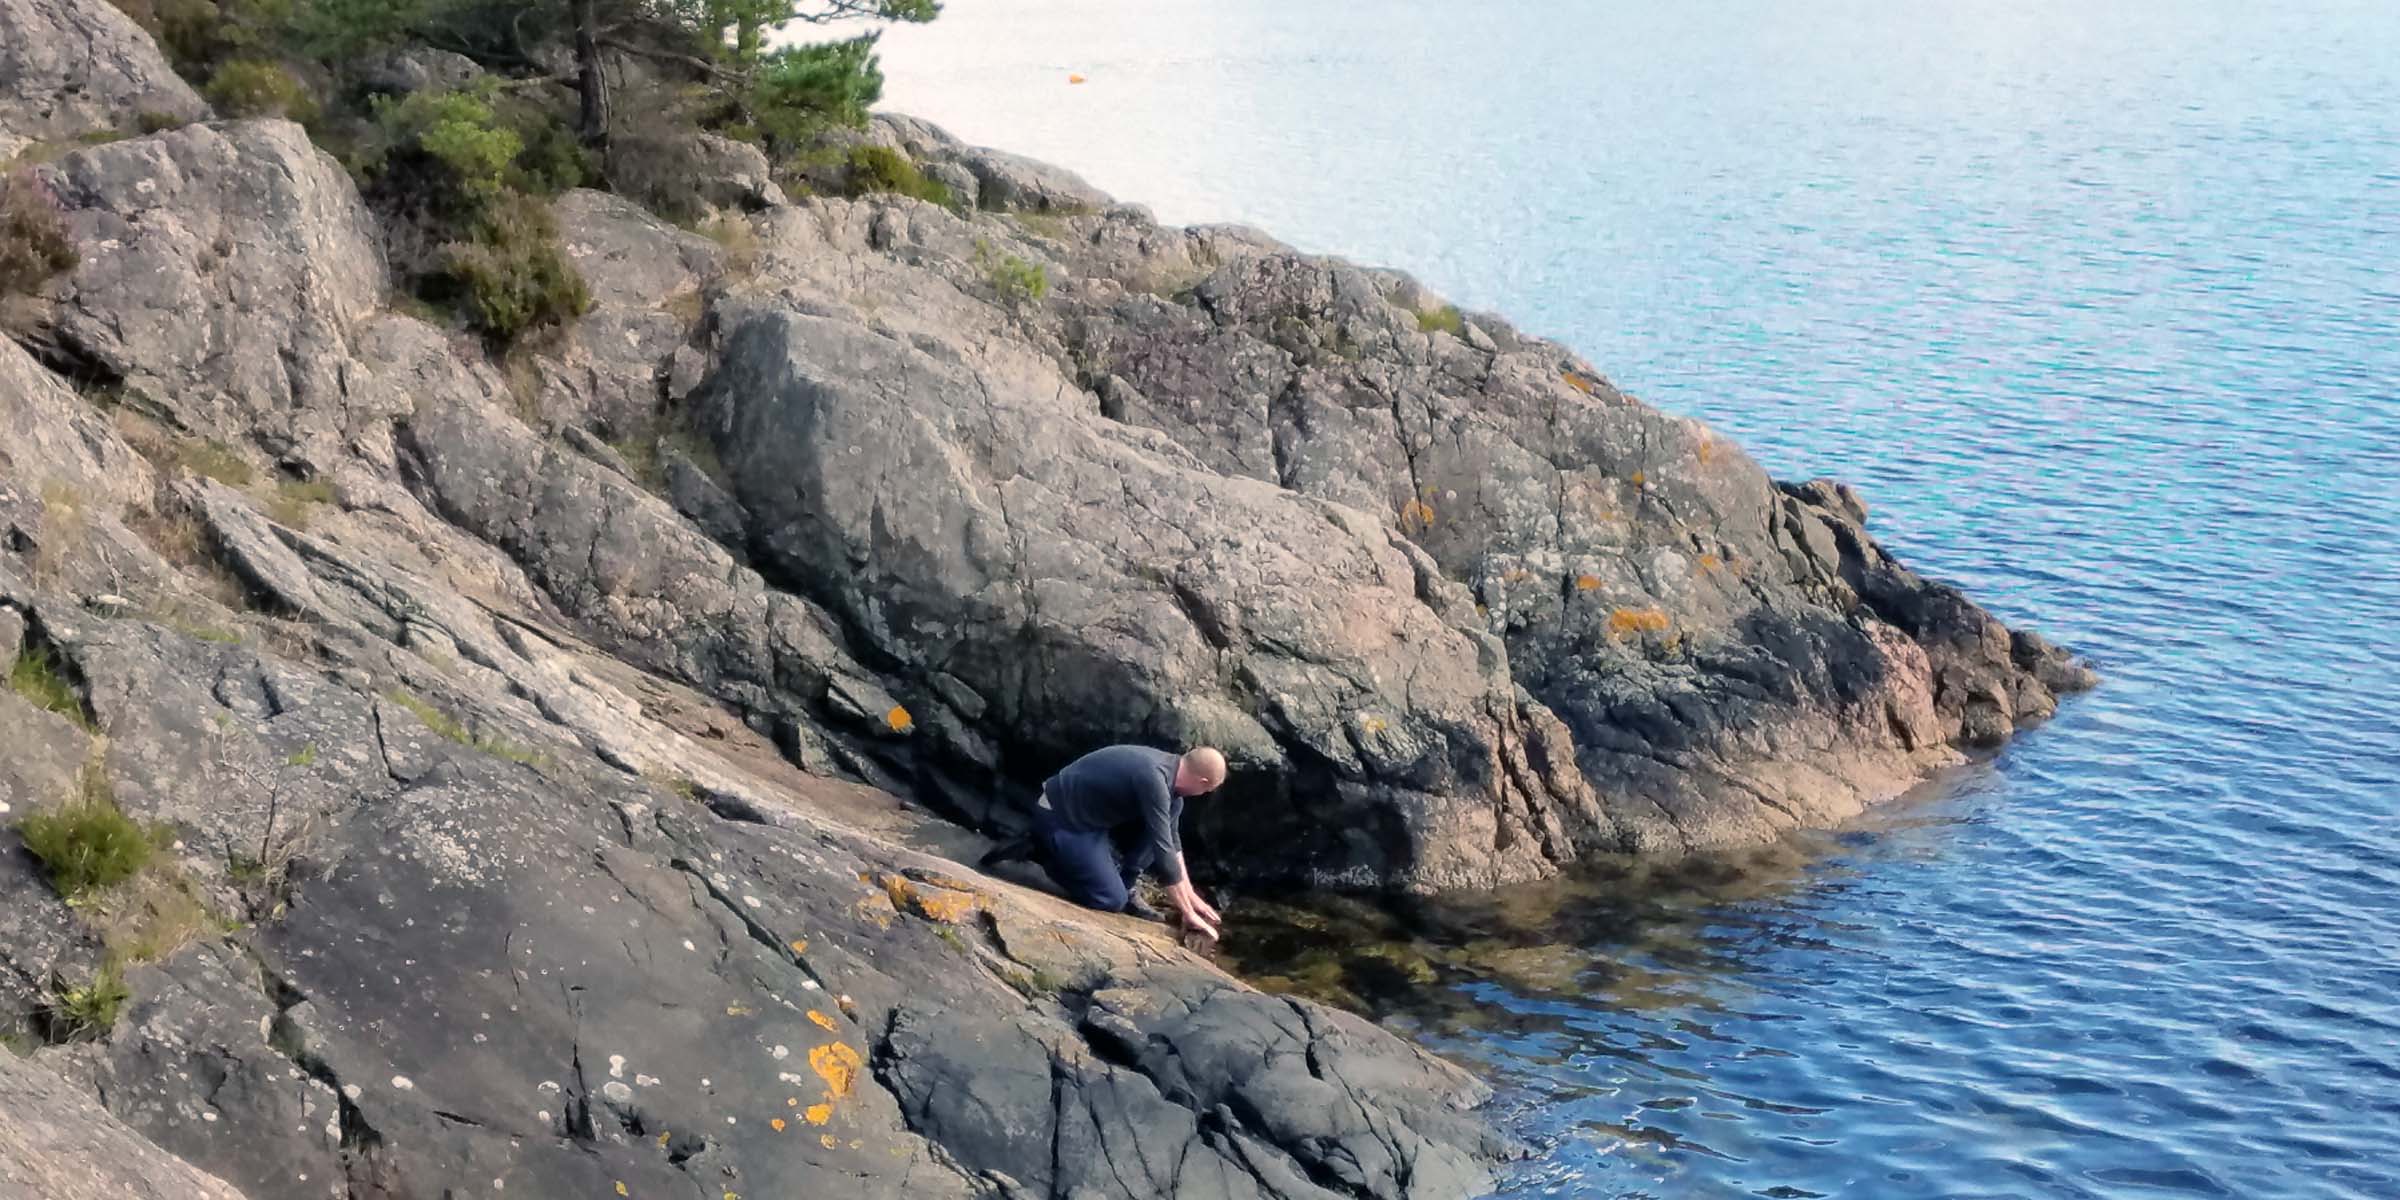 A man looking for something on a rocky coast next to bright blue water